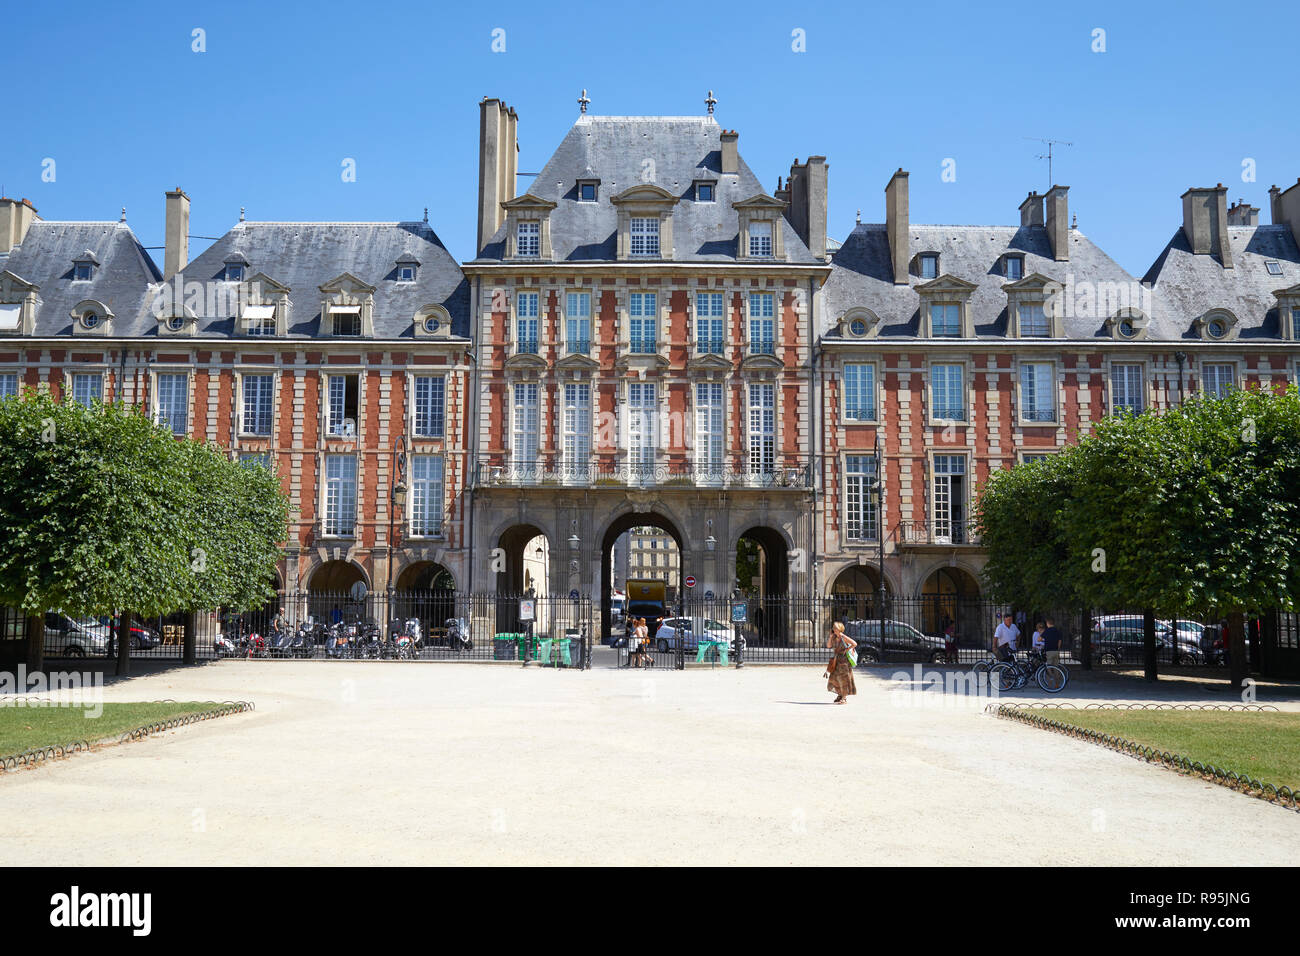 PARIS, FRANCE - JULY 6, 2018: Place des Vosges with ancient buildings and some people at midday in a sunny summer day, clear blue sky in Paris Stock Photo